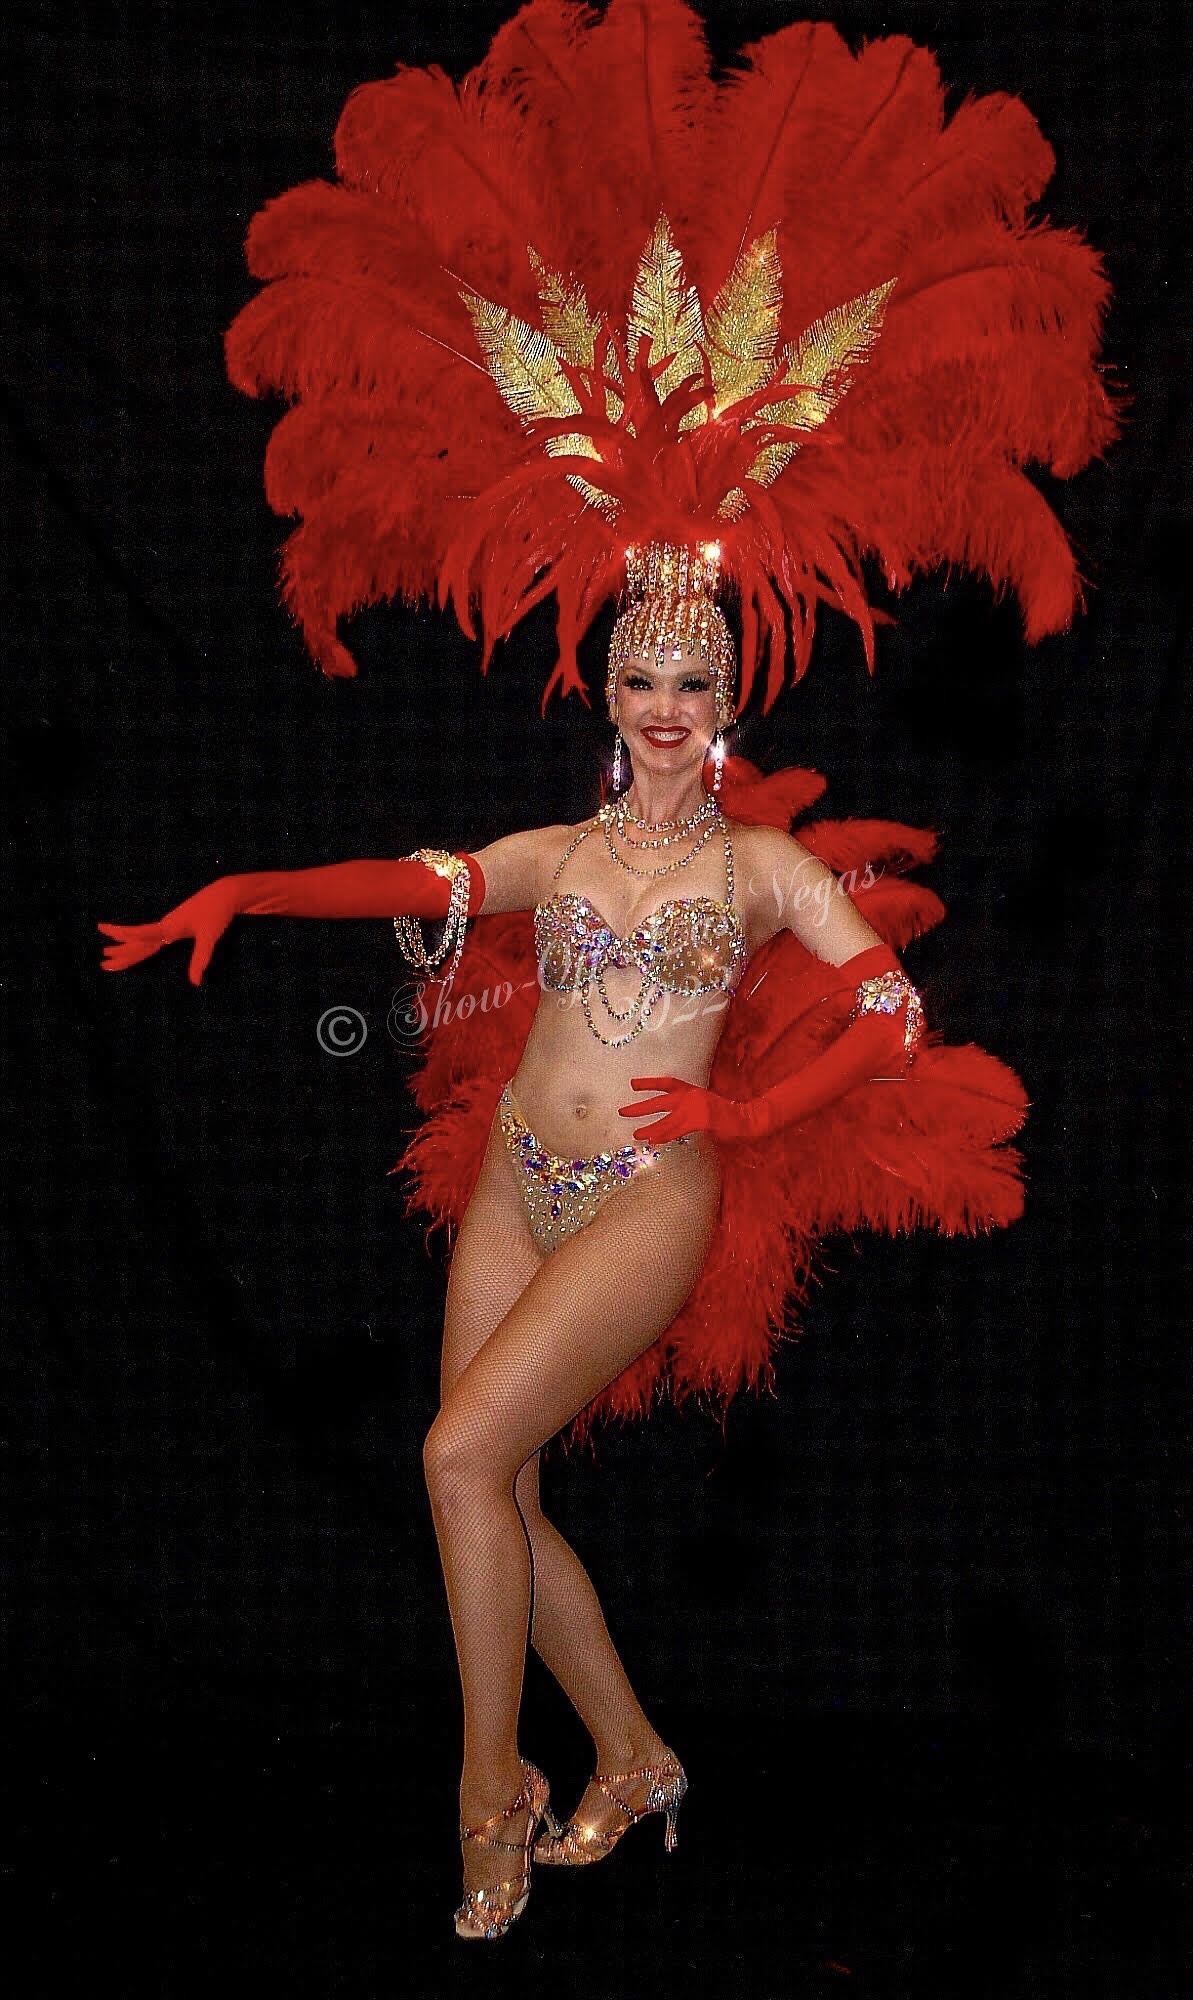 About Las Vegas styles showgirls-Answers to your questions about showgirls,  dancers, and costumed characters. - Exquisitely costumed performers for  parties and events. Screaming QueensExquisitely costumed performers for  parties and events.